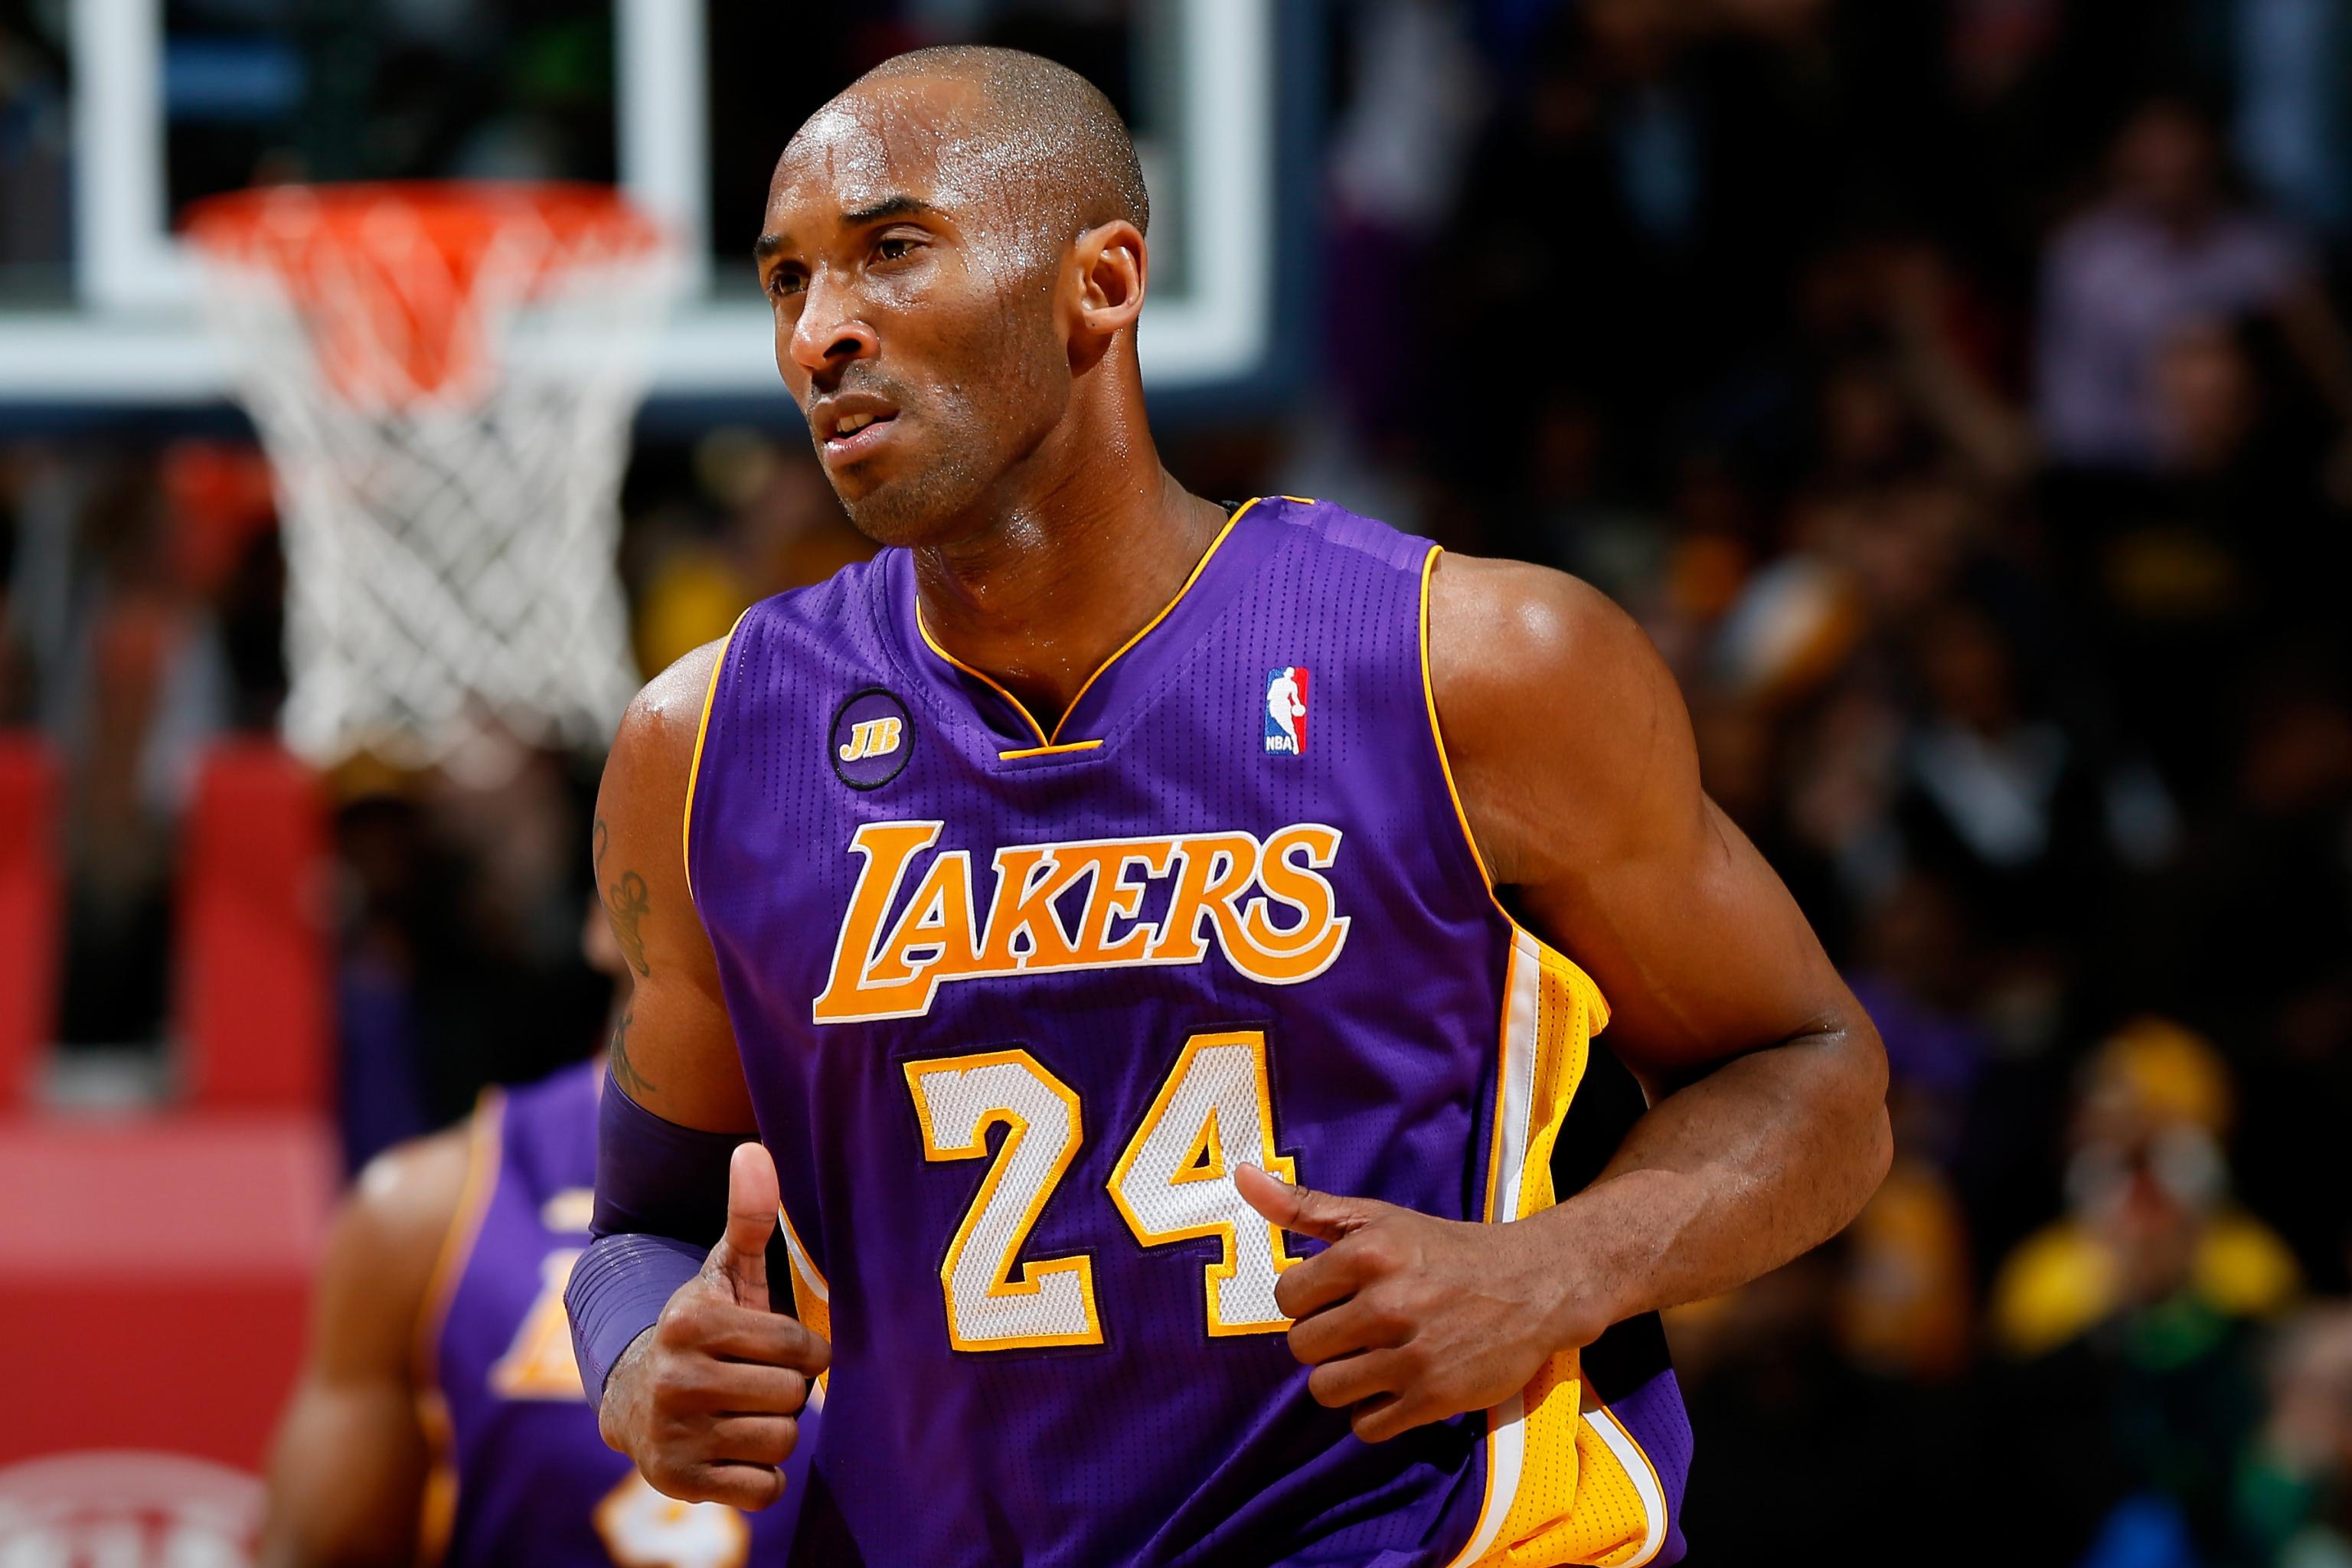 How Kobe Bryant manipulated his way to Lakers on draft day